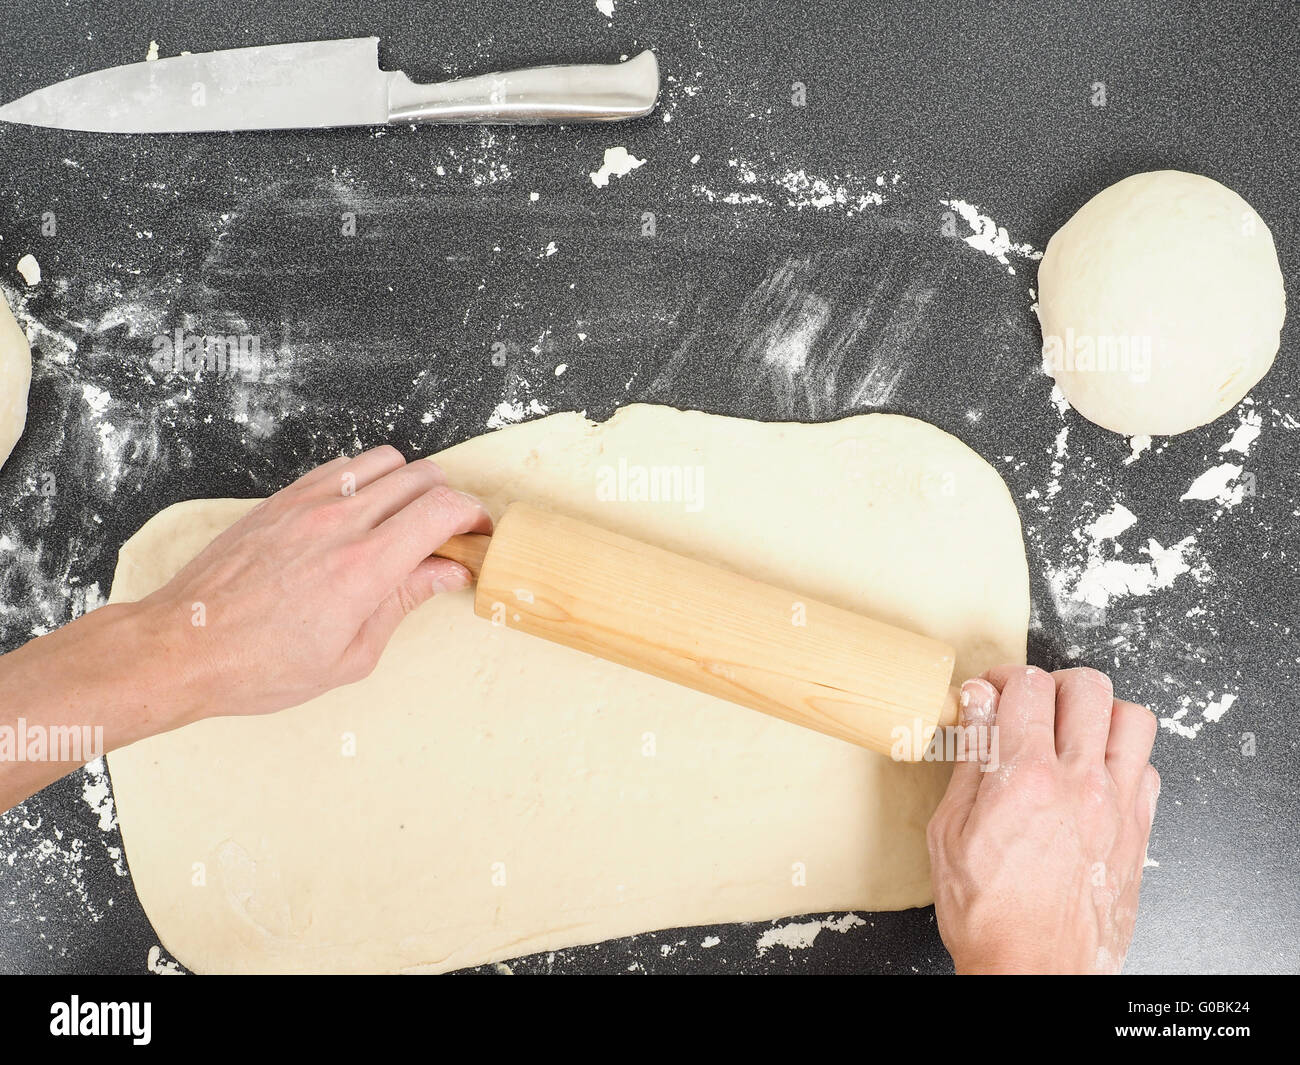 Hands handling dough with rolling pin Stock Photo